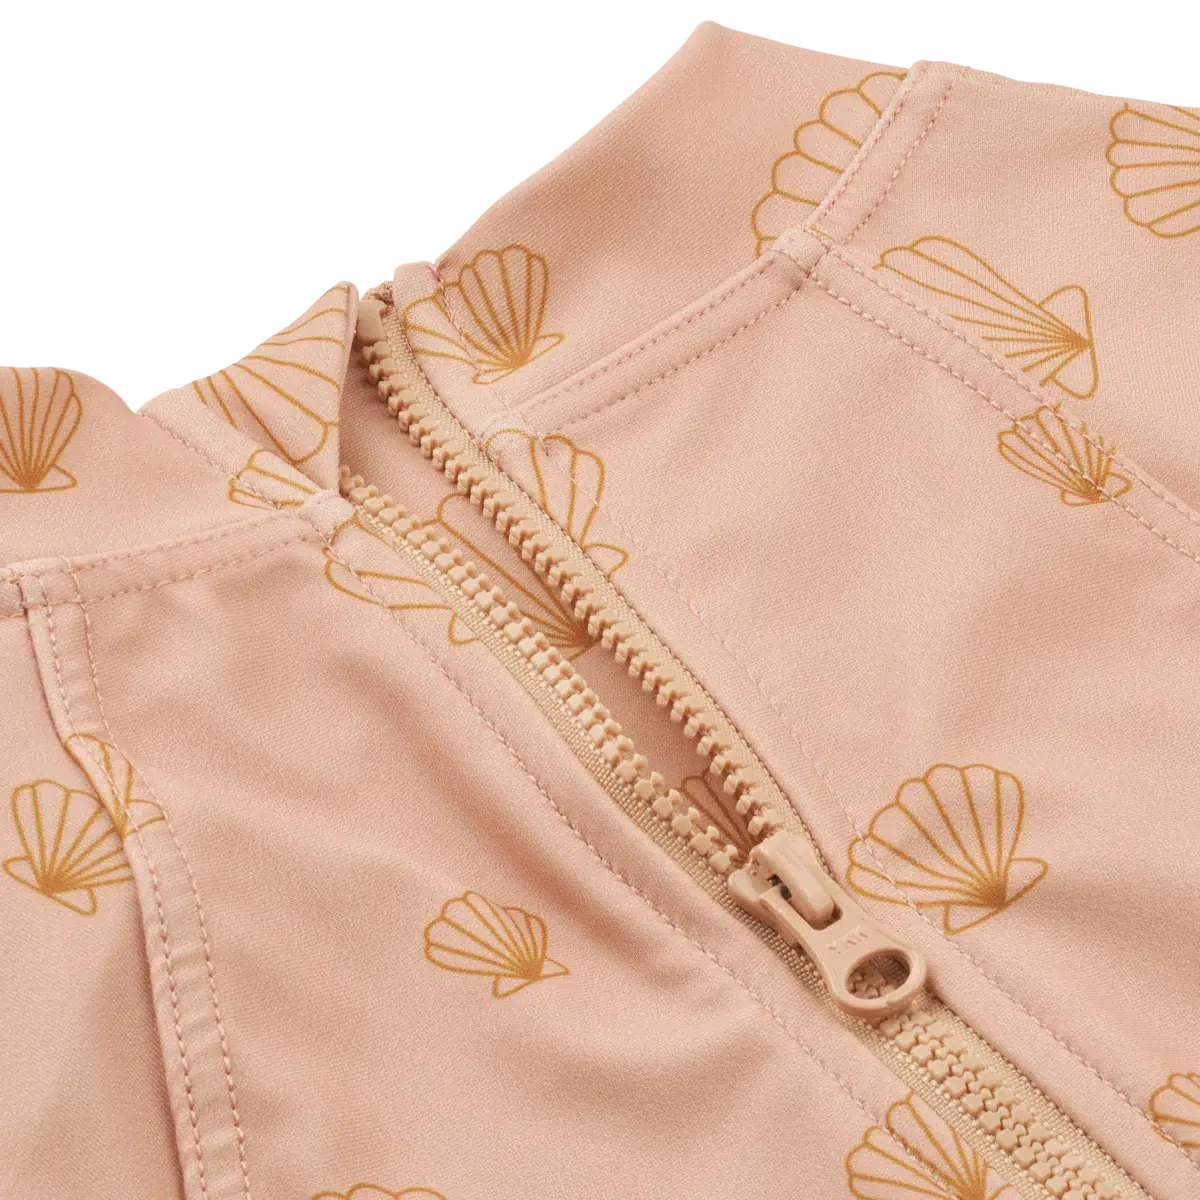 Liewood baby badedragt med lange ærmer - Maxime swimsuit - Sea shell / Pale tuscany - Badetøj - MamaMilla